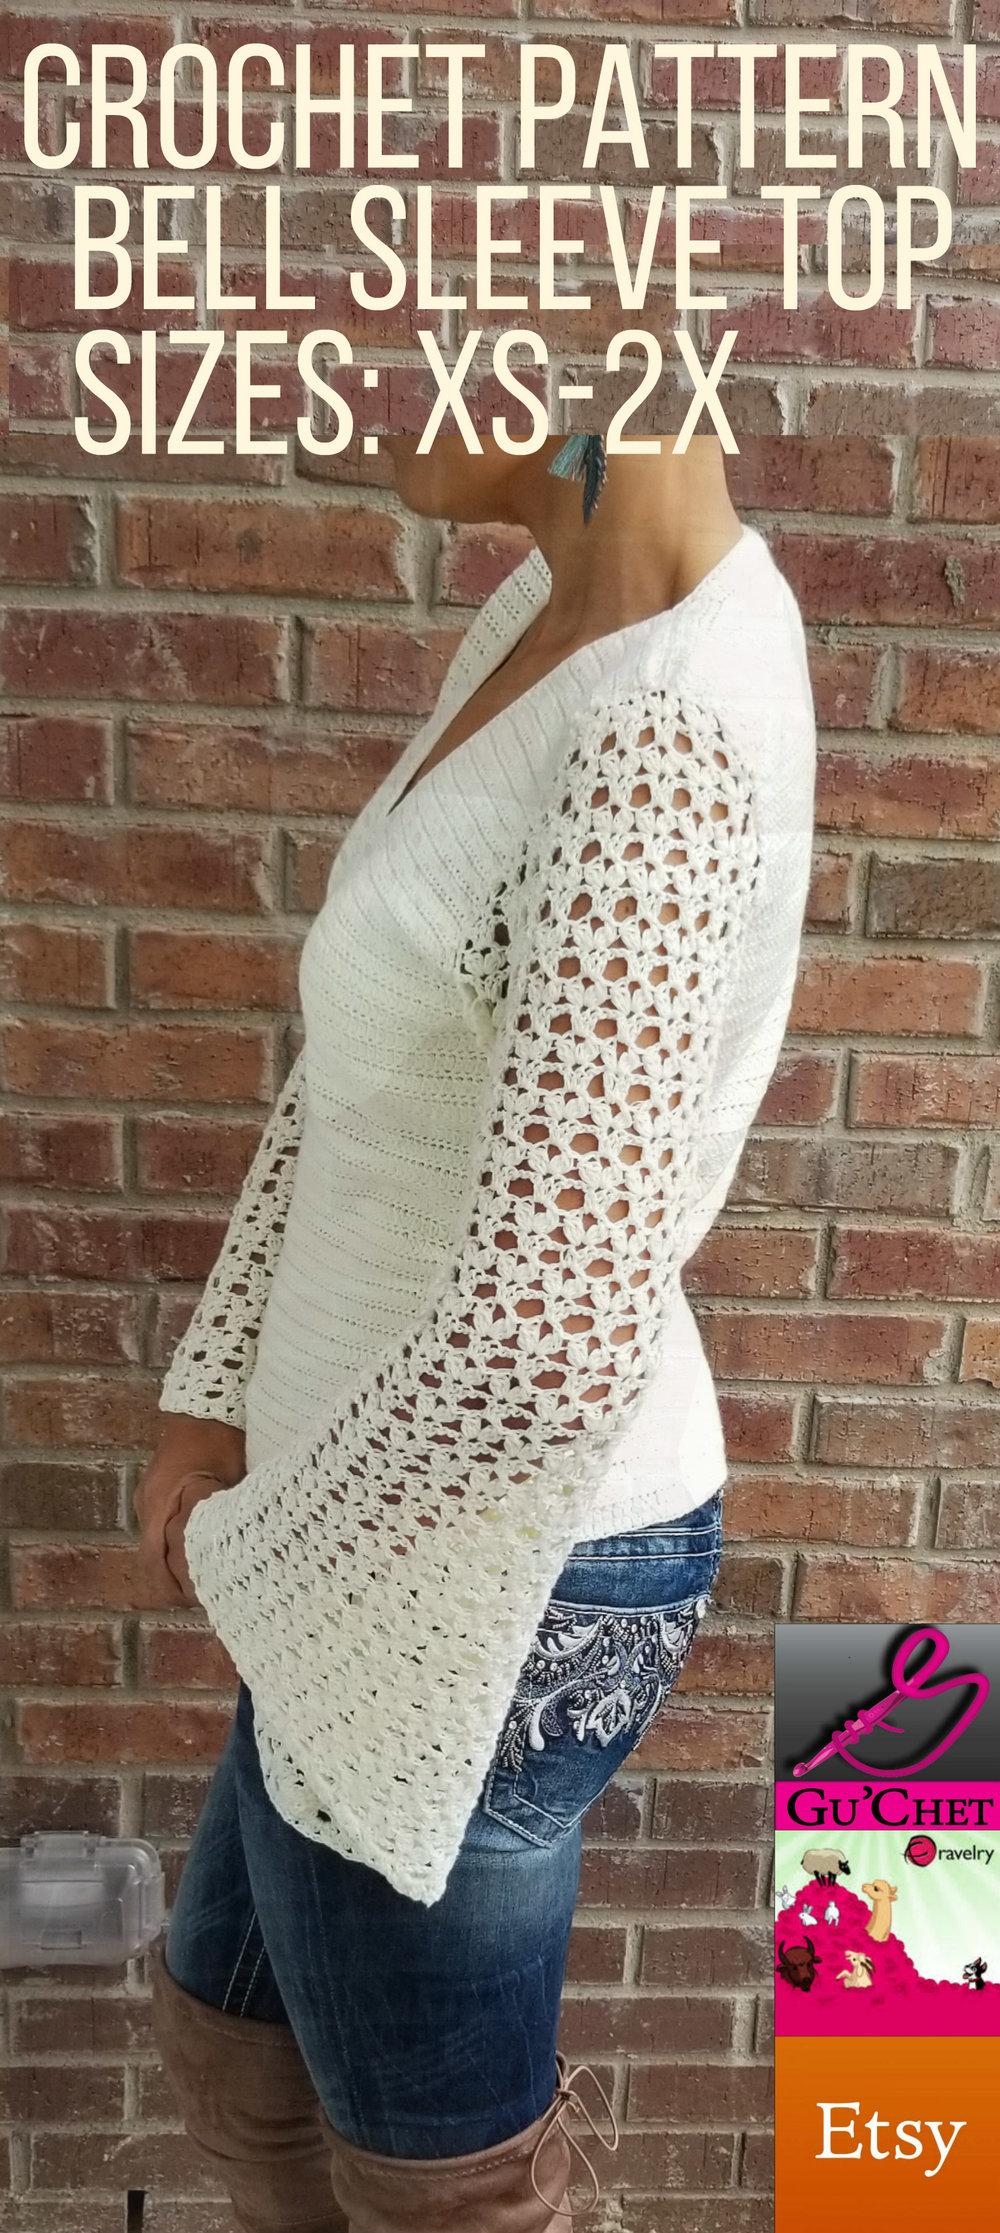 How To Crochet A Bell Sleeve Sweater (EASY)